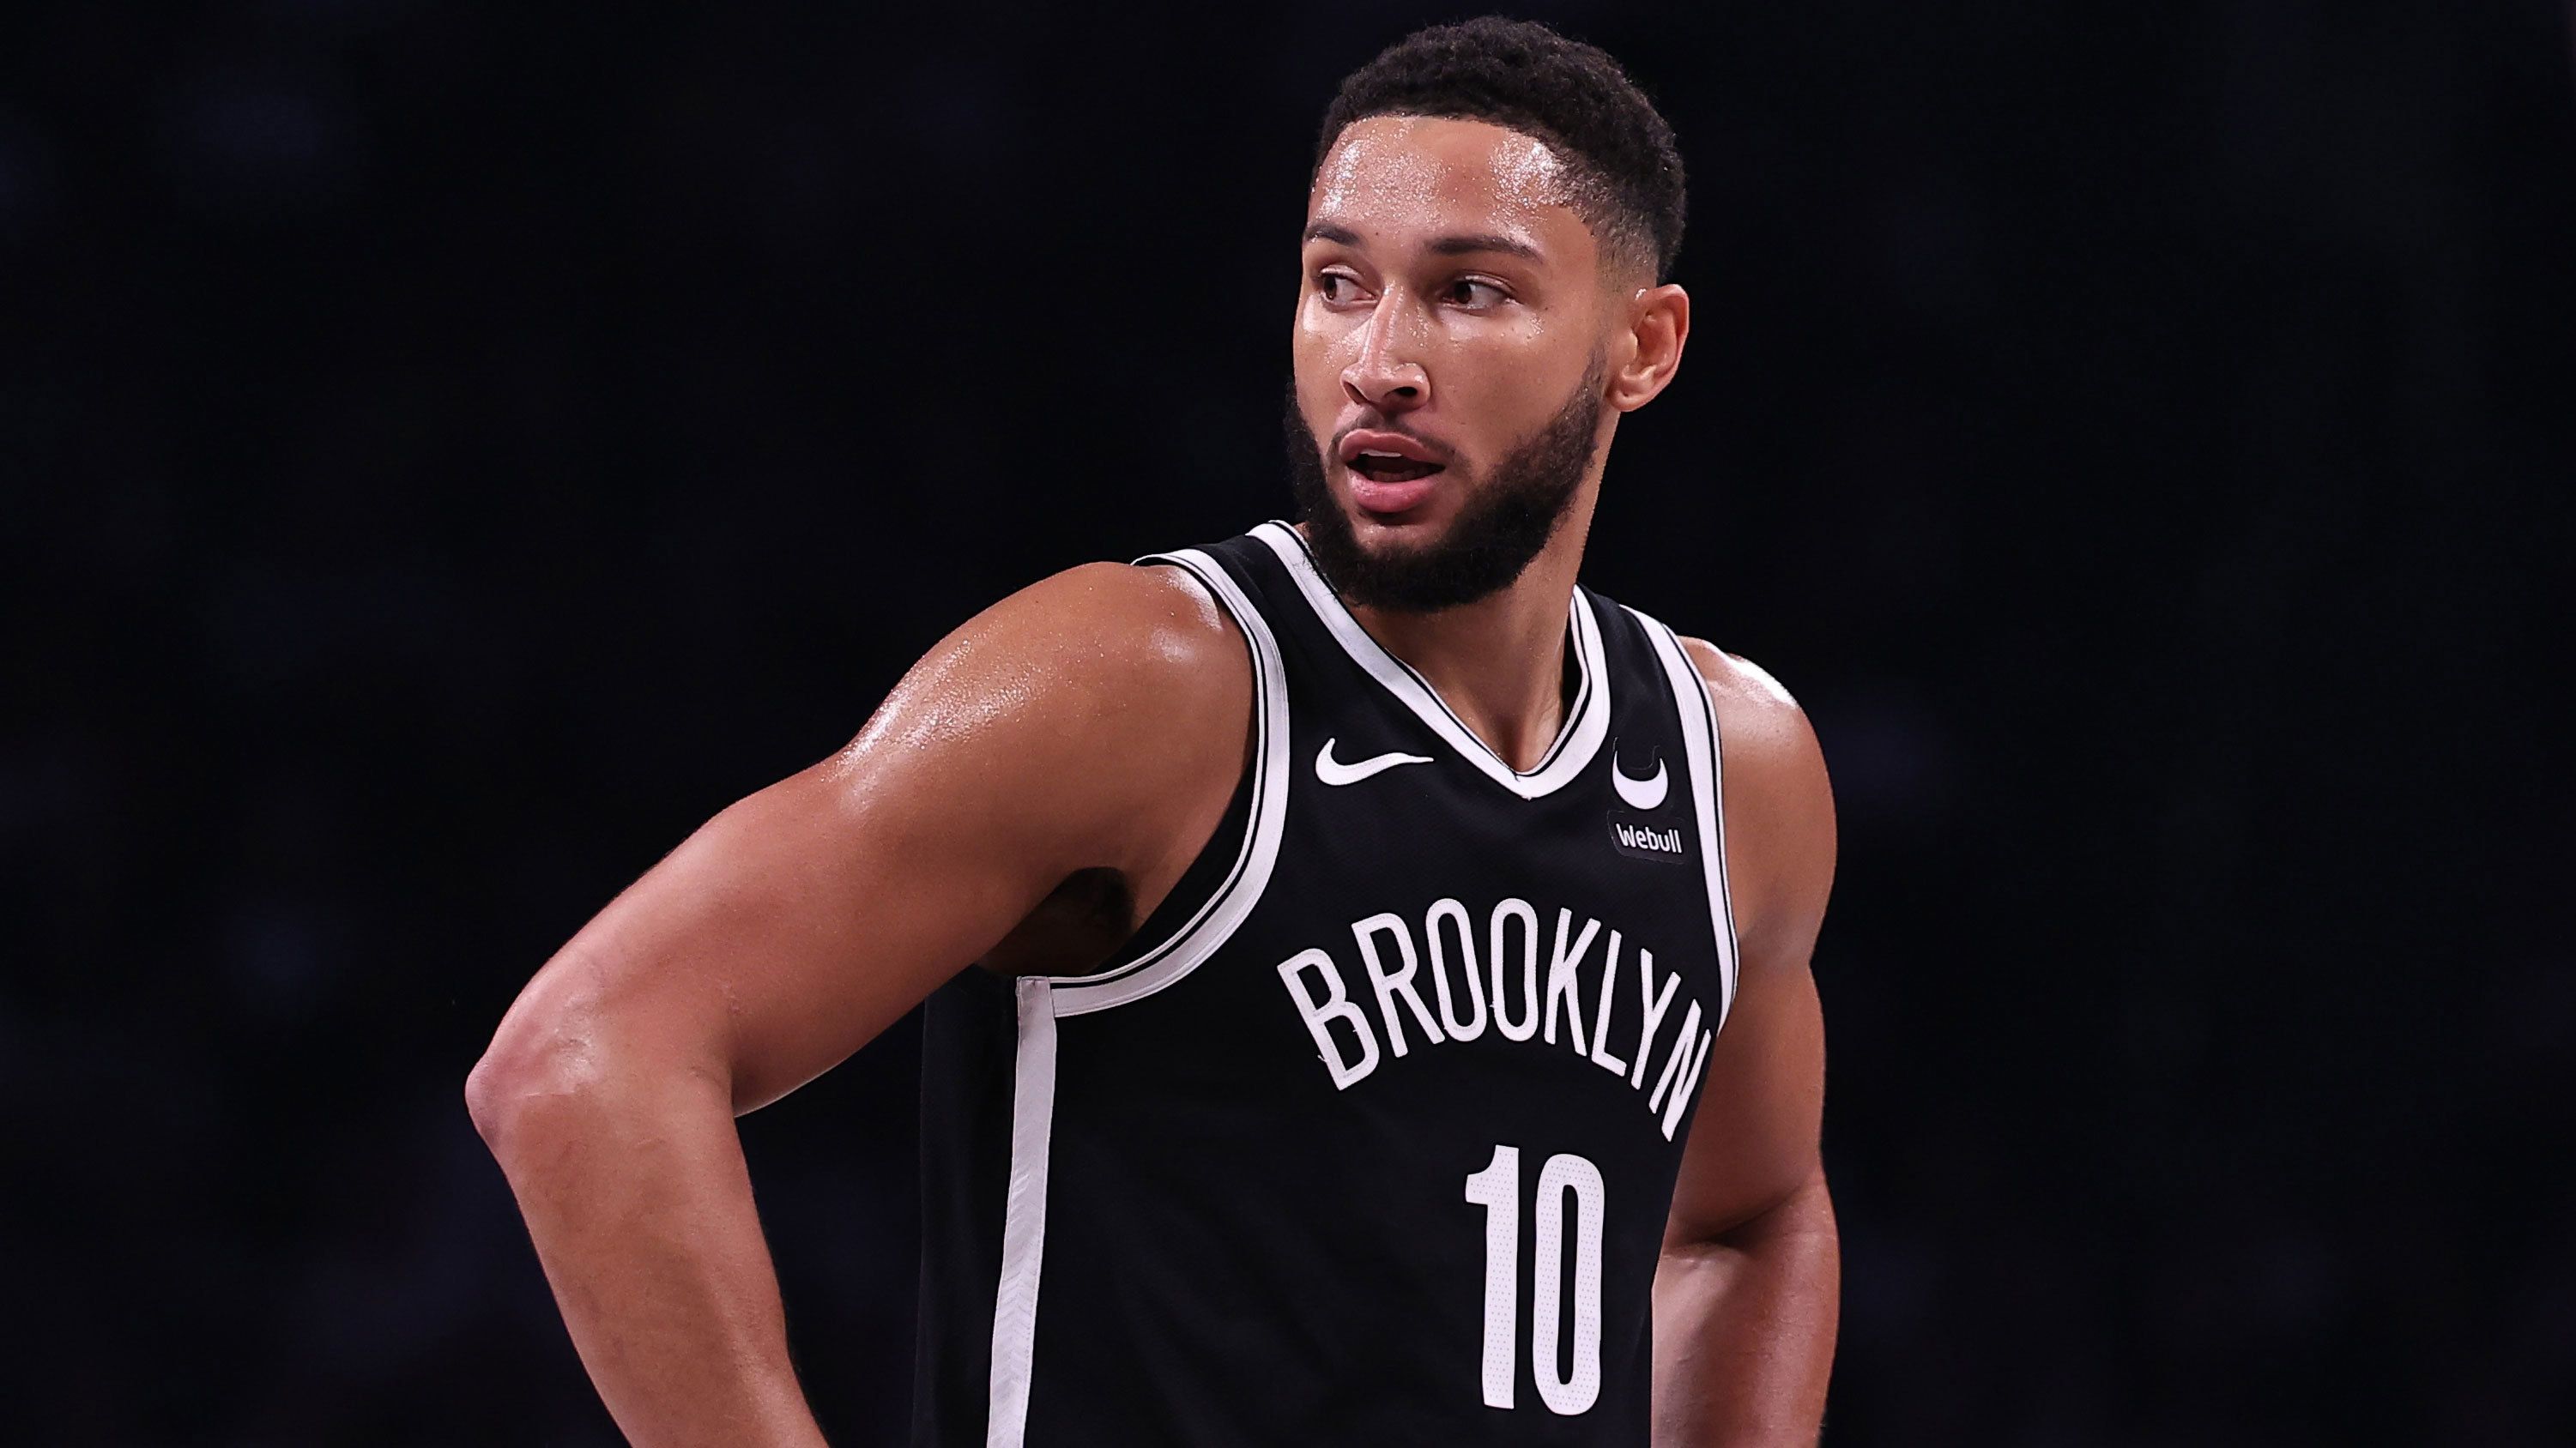 Ben Simmons of the Brooklyn Nets looks on during the first quarter of the game against the Cleveland Cavaliers.